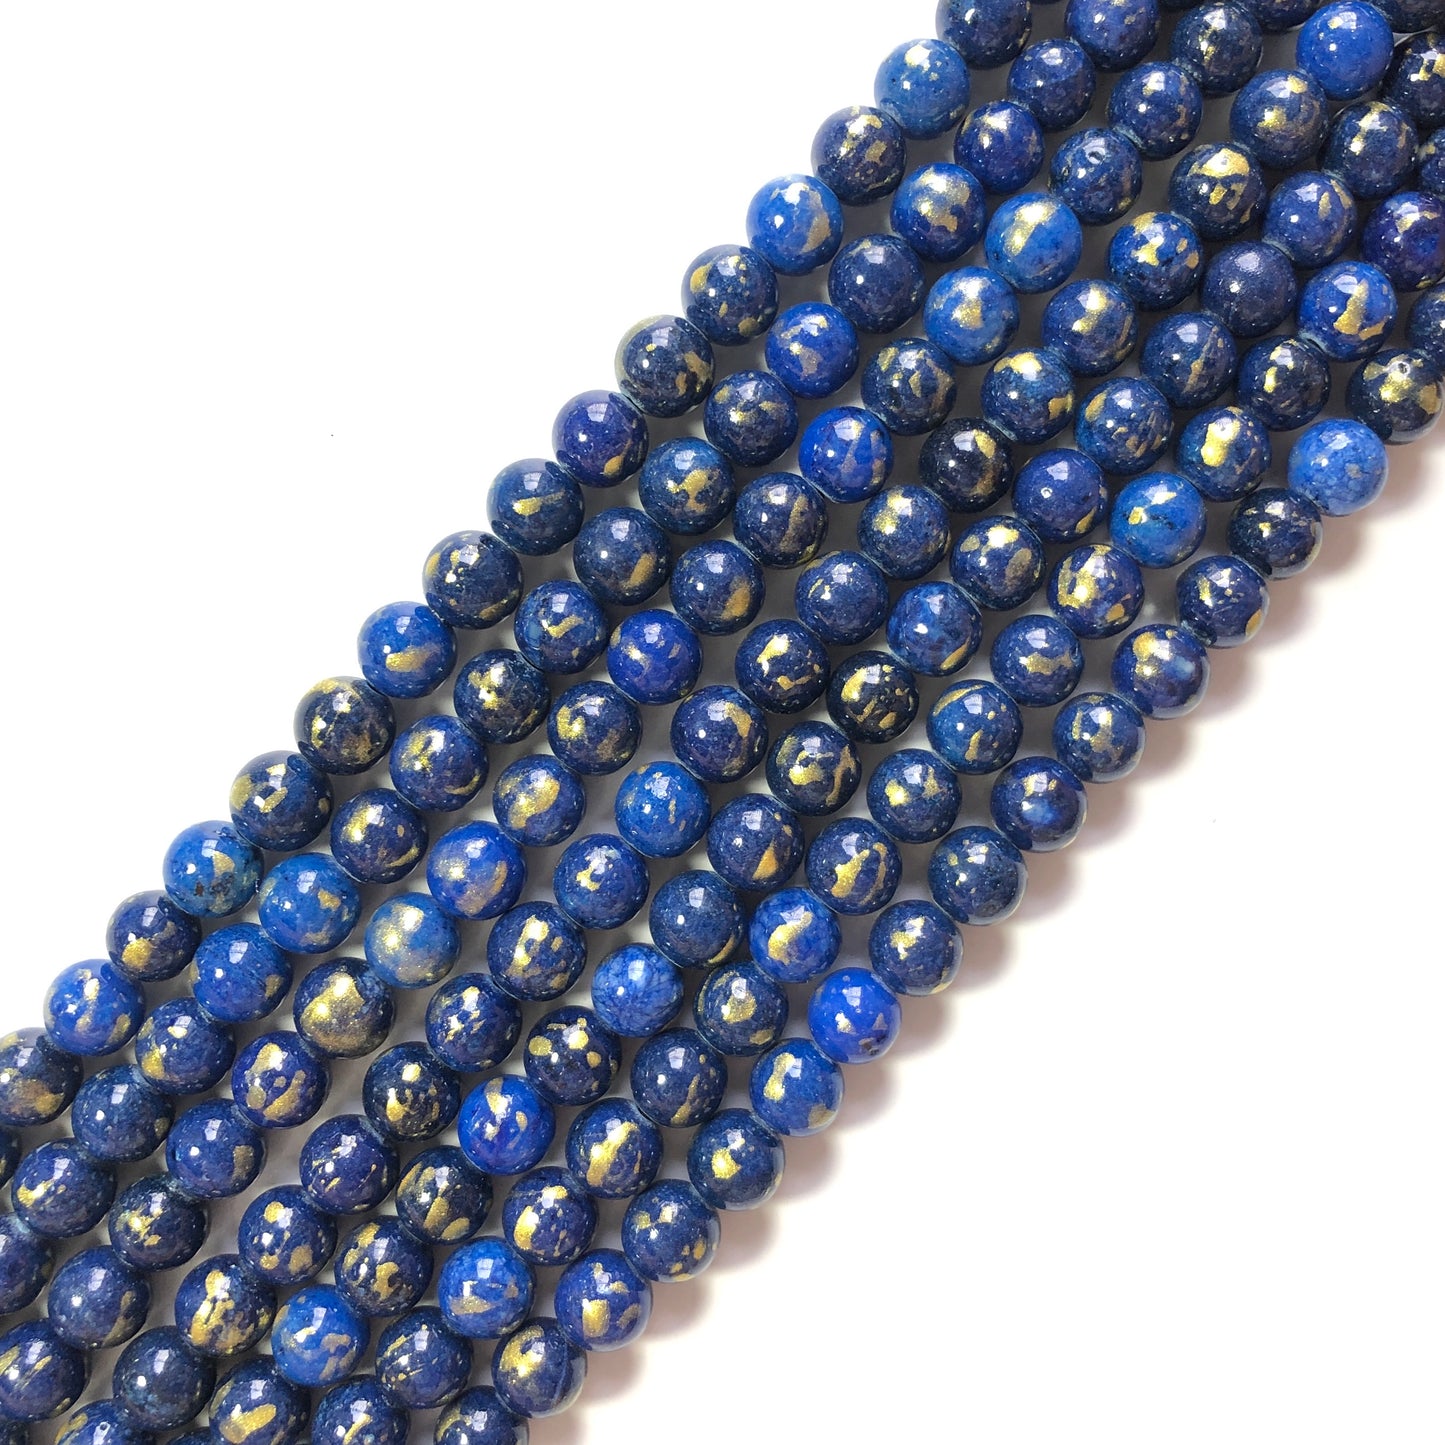 2 Strands/lot 8mm, 10mm Blue Gold Plated Jade Round Stone Beads Stone Beads 8mm Stone Beads Gold Plated Jade Beads Round Jade Beads Charms Beads Beyond